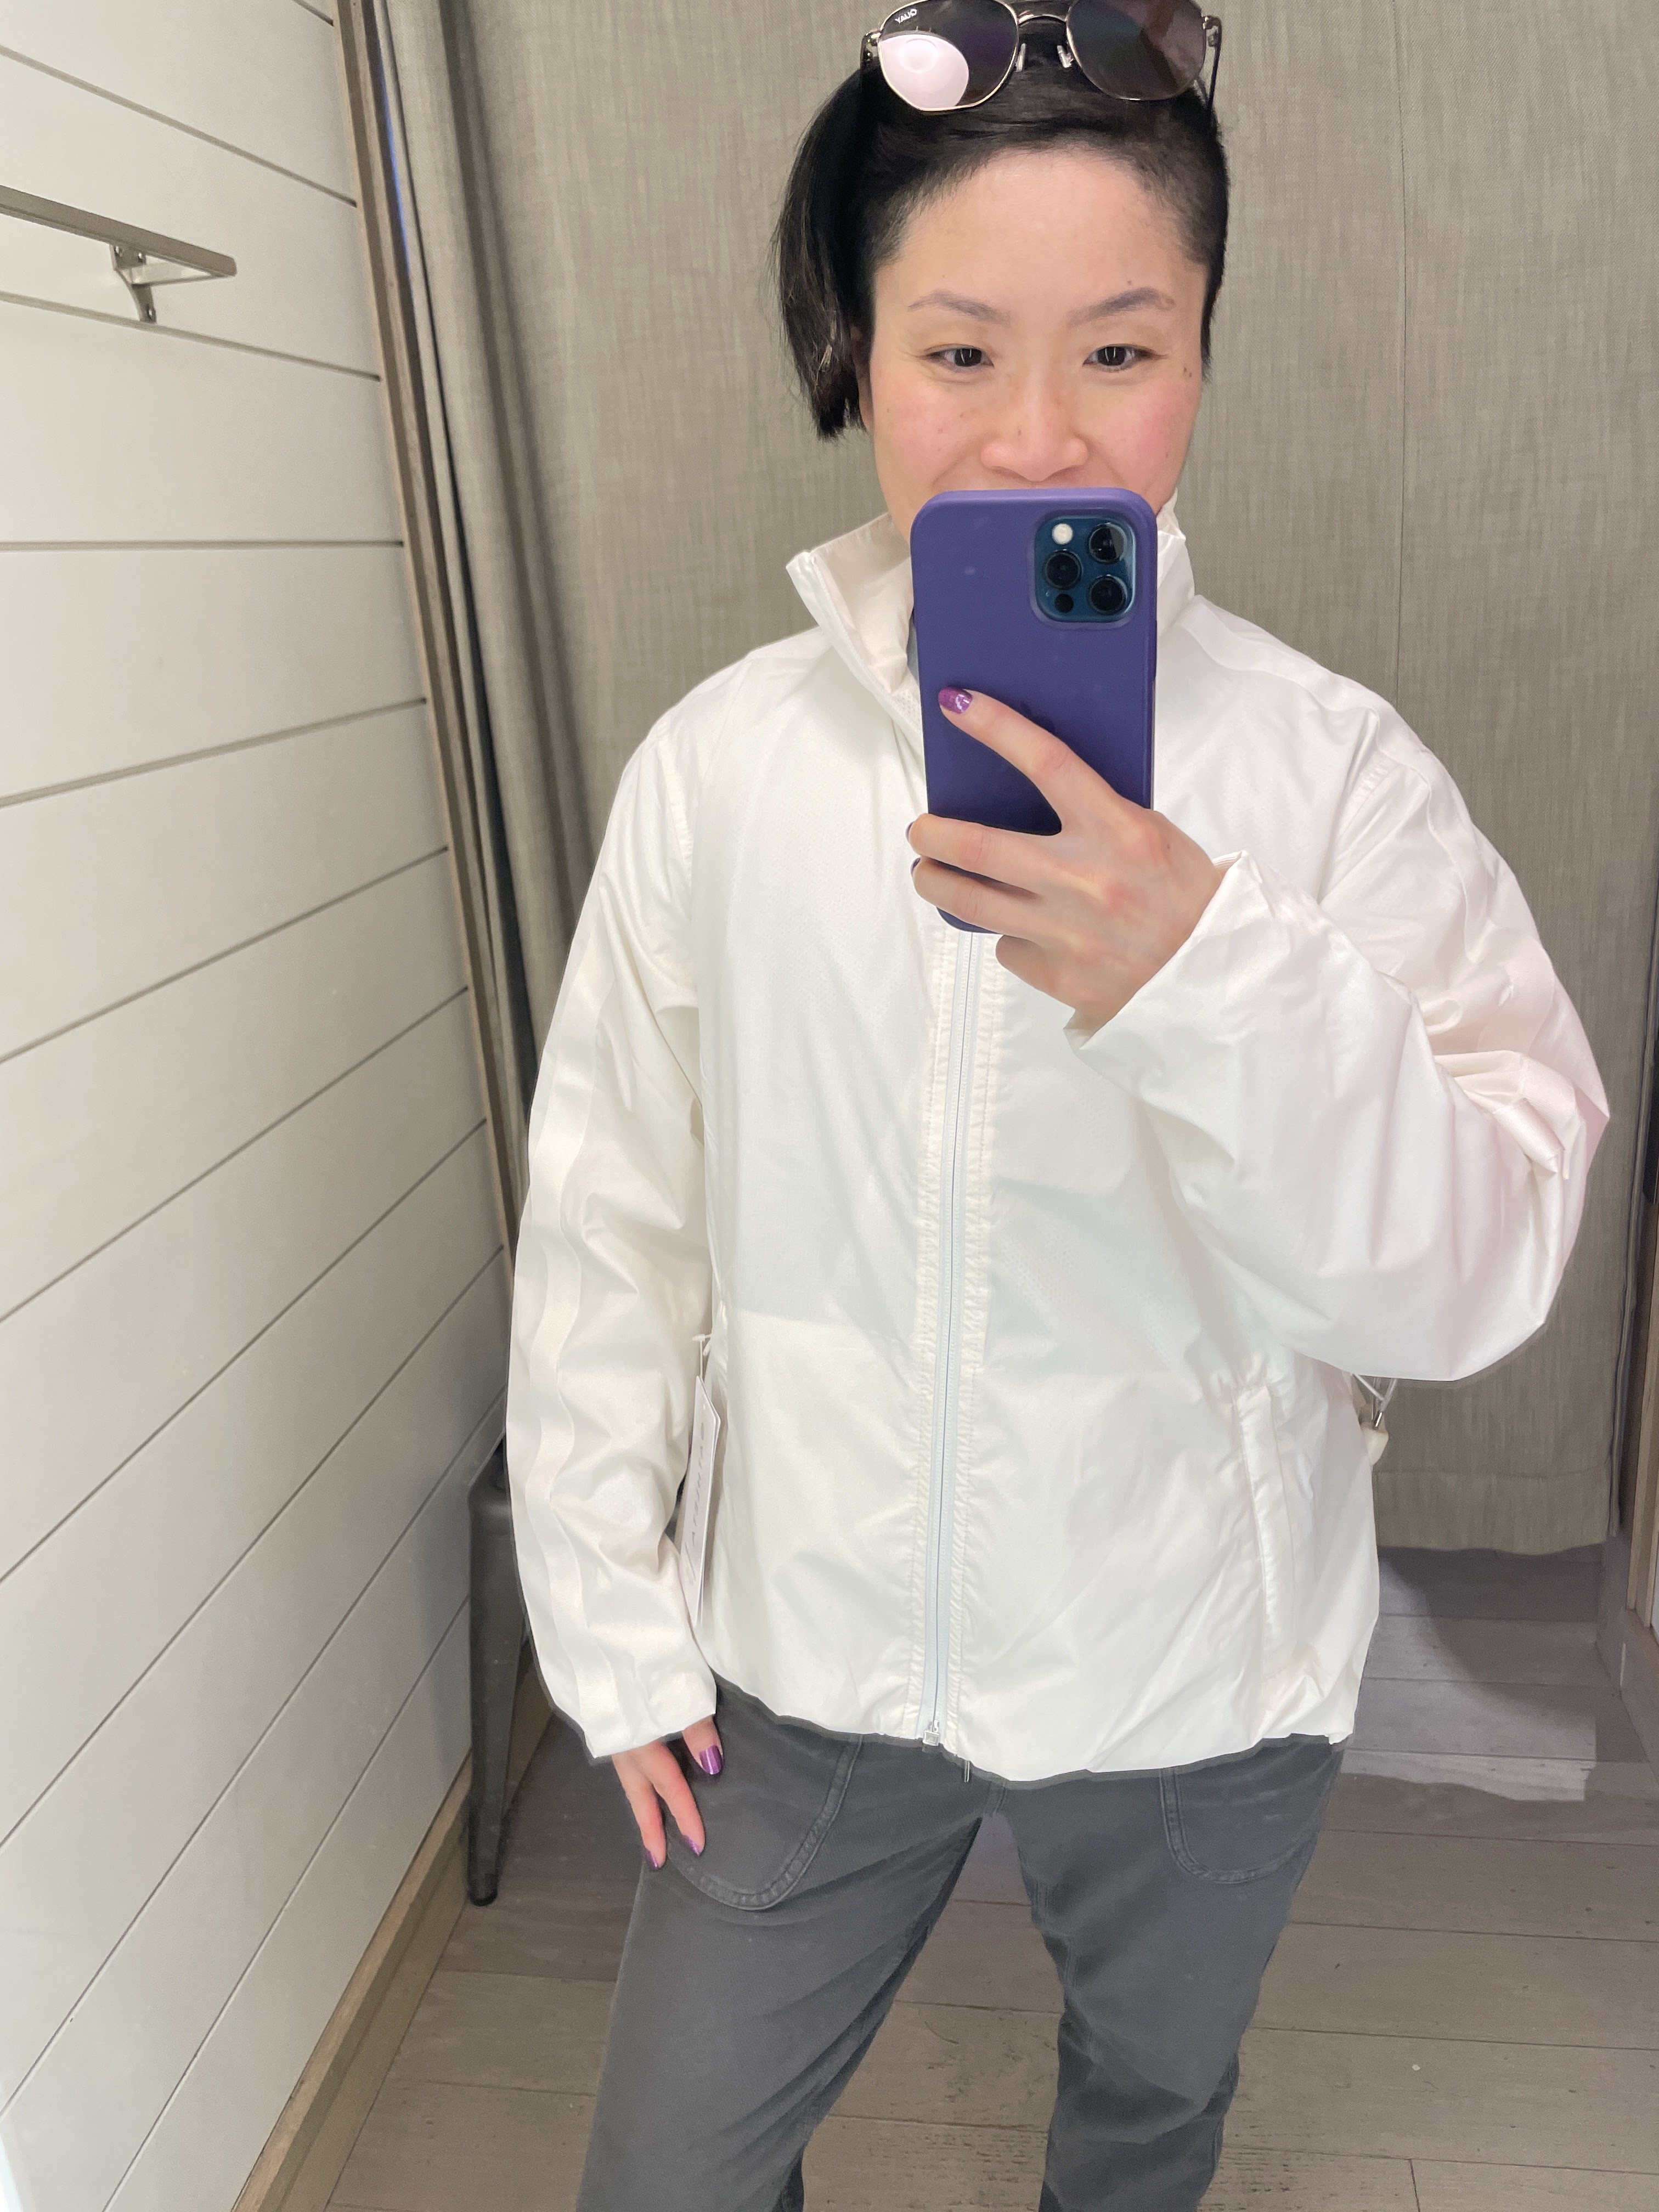 Fit Review! Athleta Store Try Ons - Sightseer Lace Jacket & Farallon Jogger